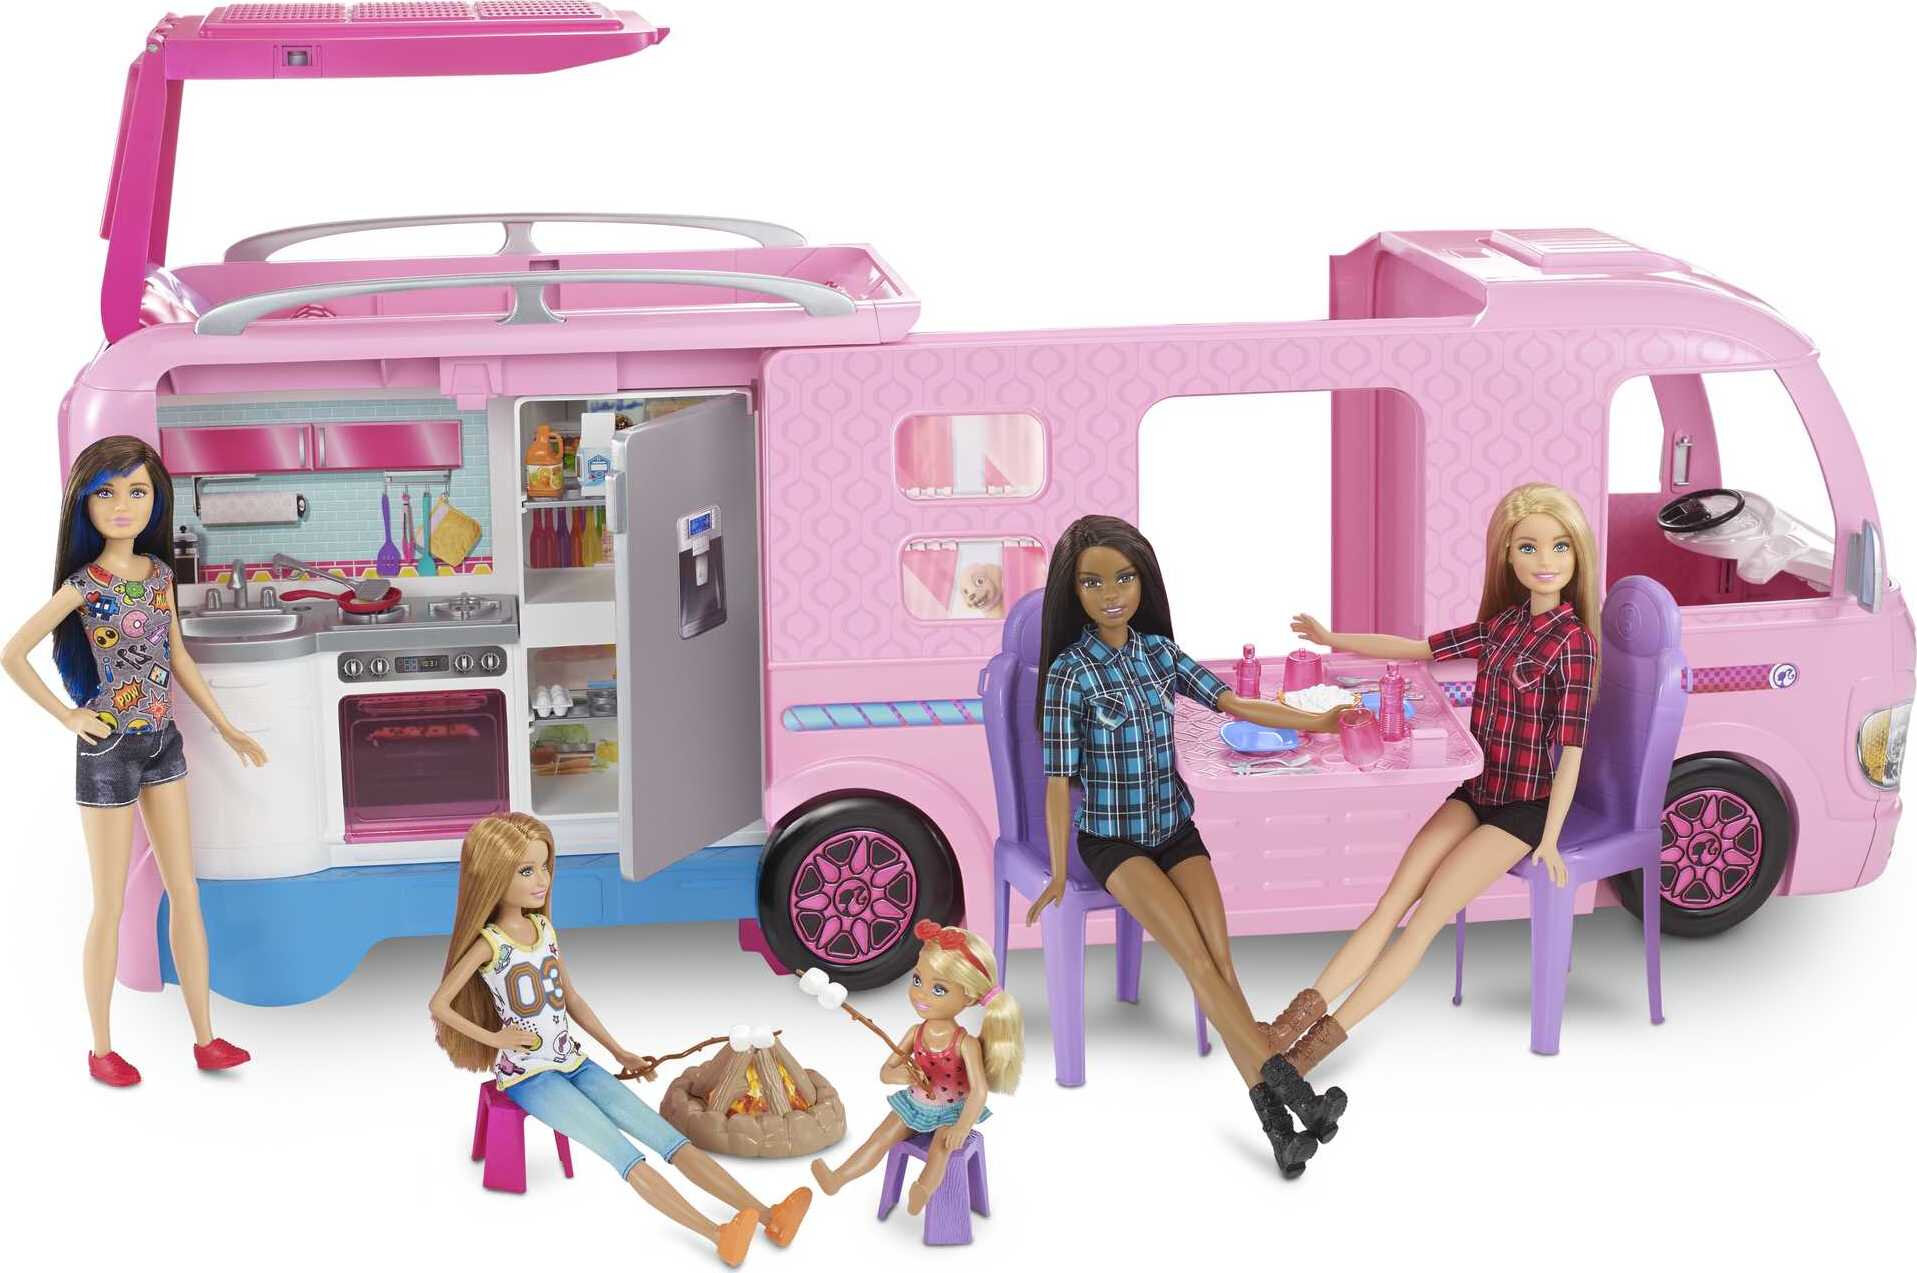 Barbie Camper, Doll Playset with 50 Accessories and Waterslide, Dream Camper - image 4 of 8